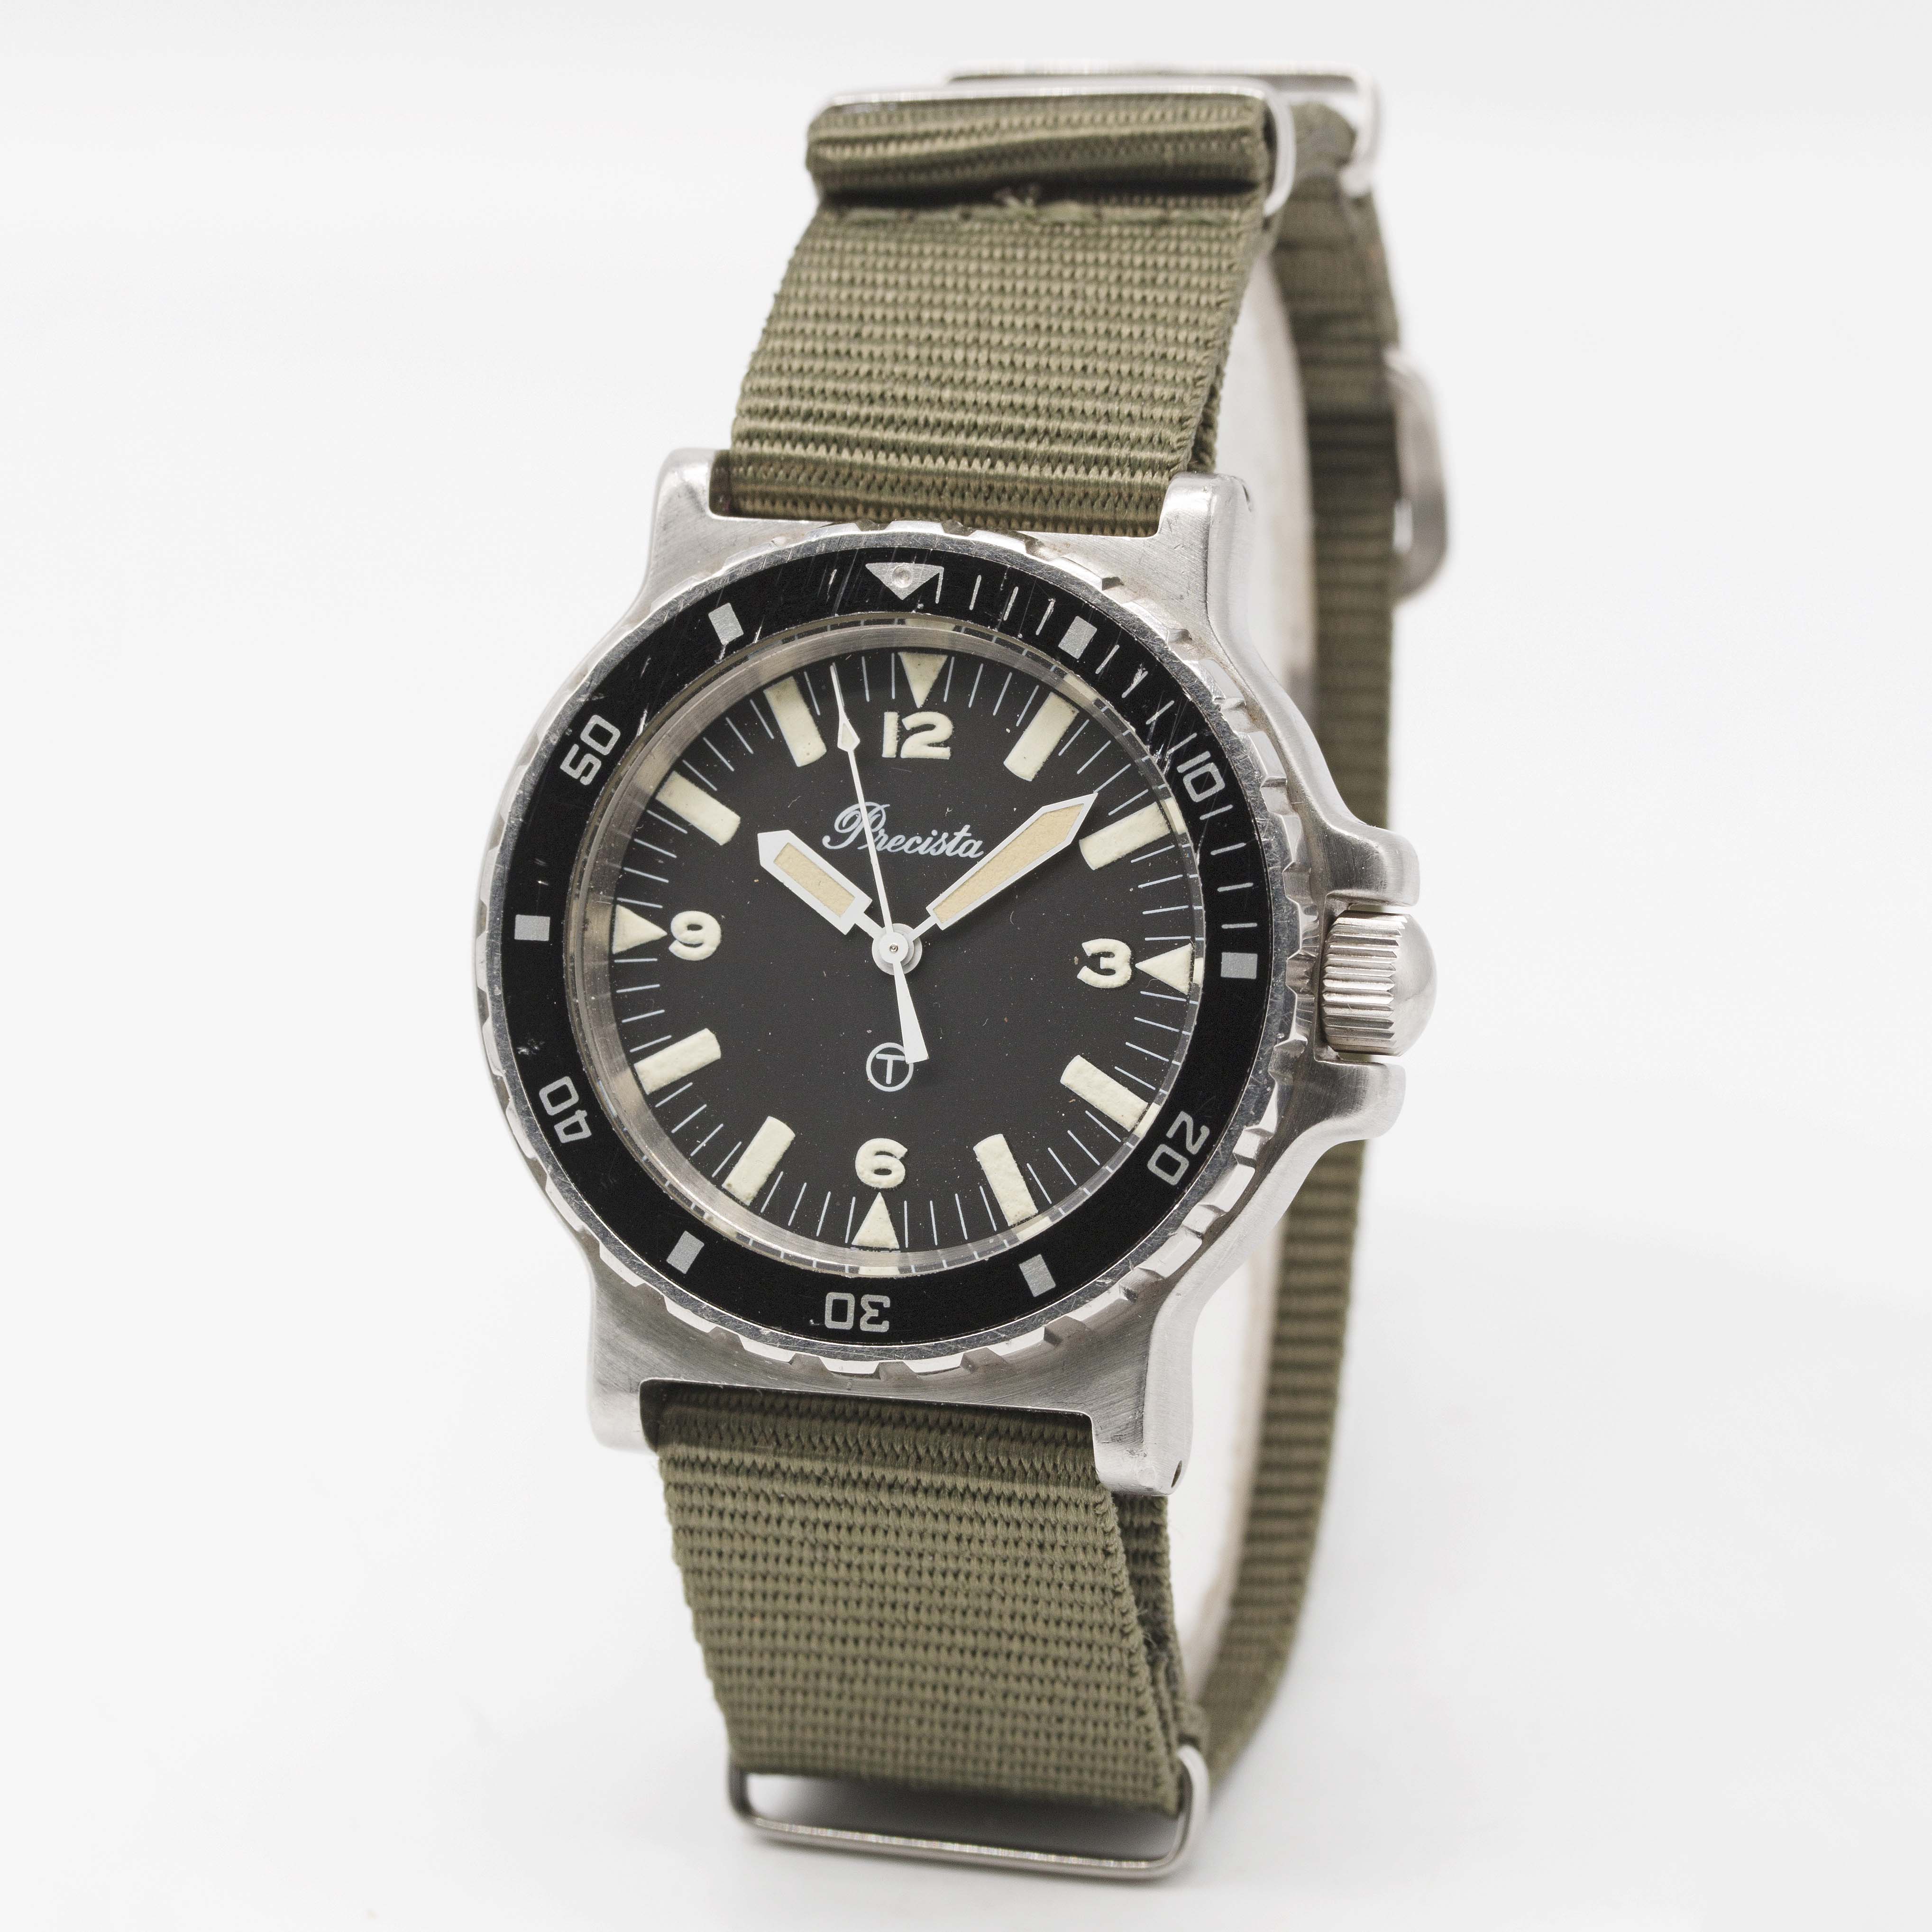 A GENTLEMAN'S STAINLESS STEEL BRITISH MILITARY PRECISTA ROYAL NAVY DIVERS WRIST WATCH DATED 1989 - Image 2 of 4